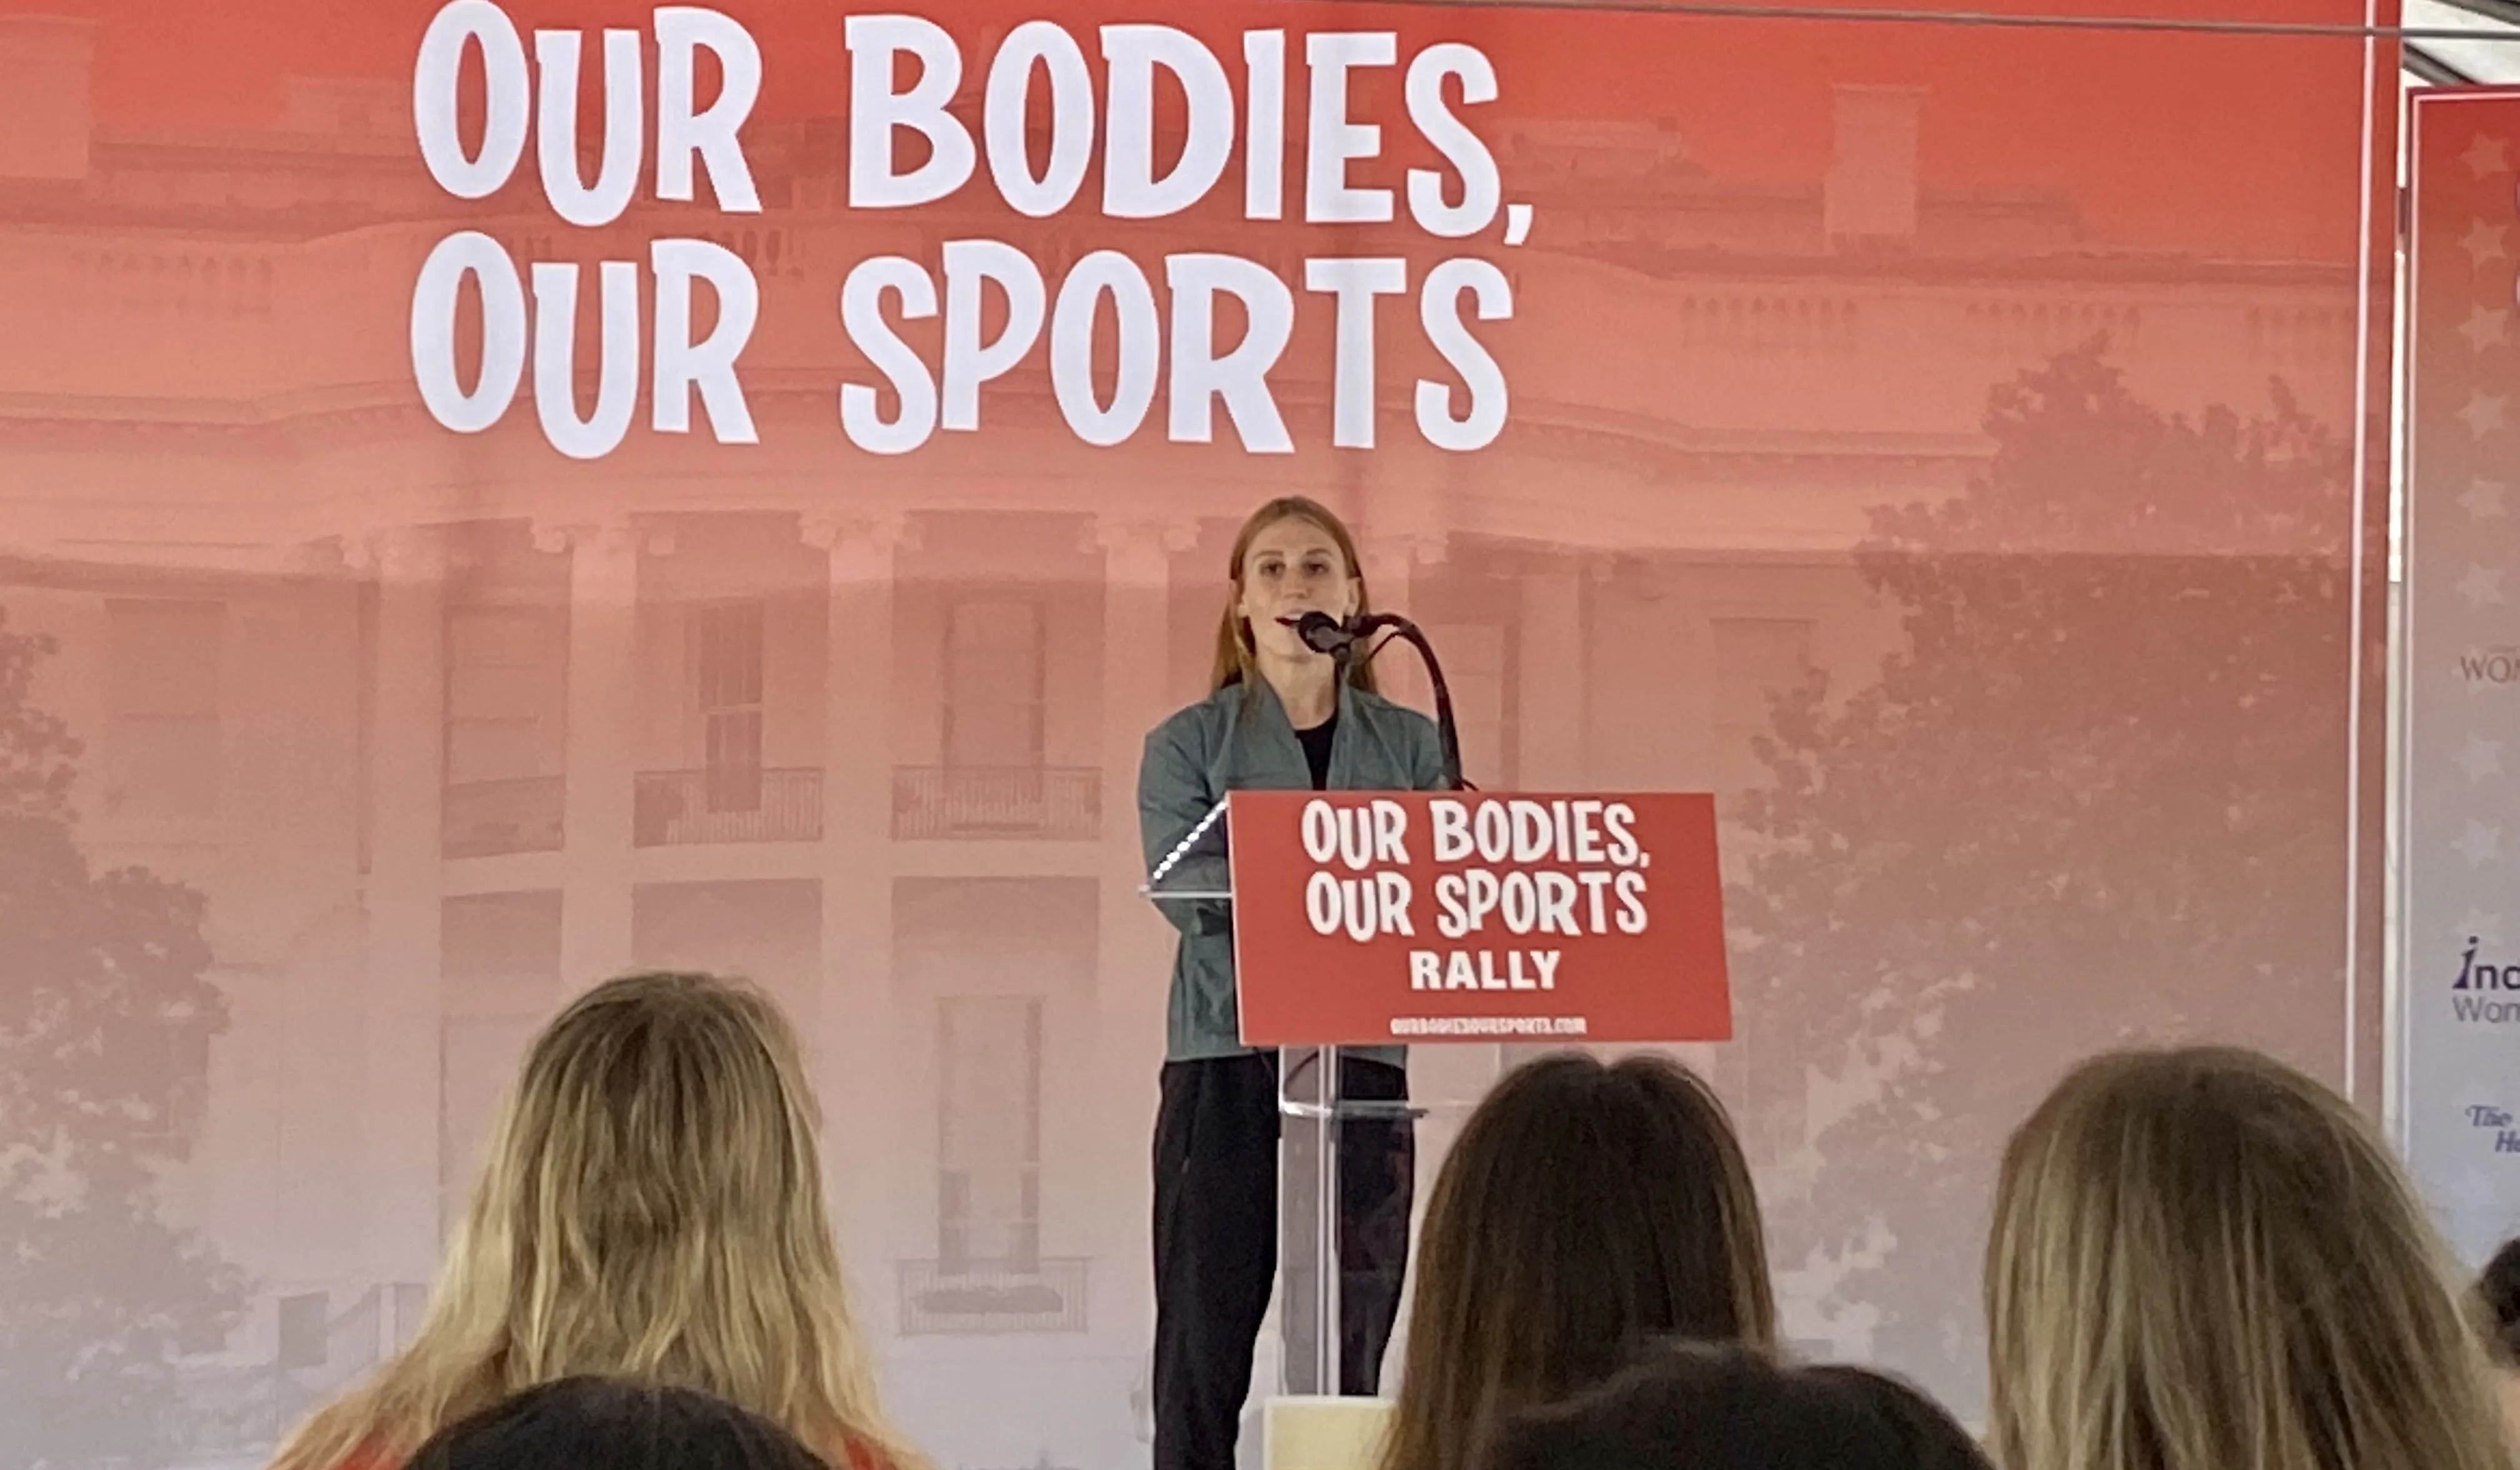 Madisan DeBos, a Division I track and cross country student-athlete at Southern Utah University, speaks at the "Our Bodies, Our Sports" rally in Washington, D.C., on June 23, 2022.?w=200&h=150